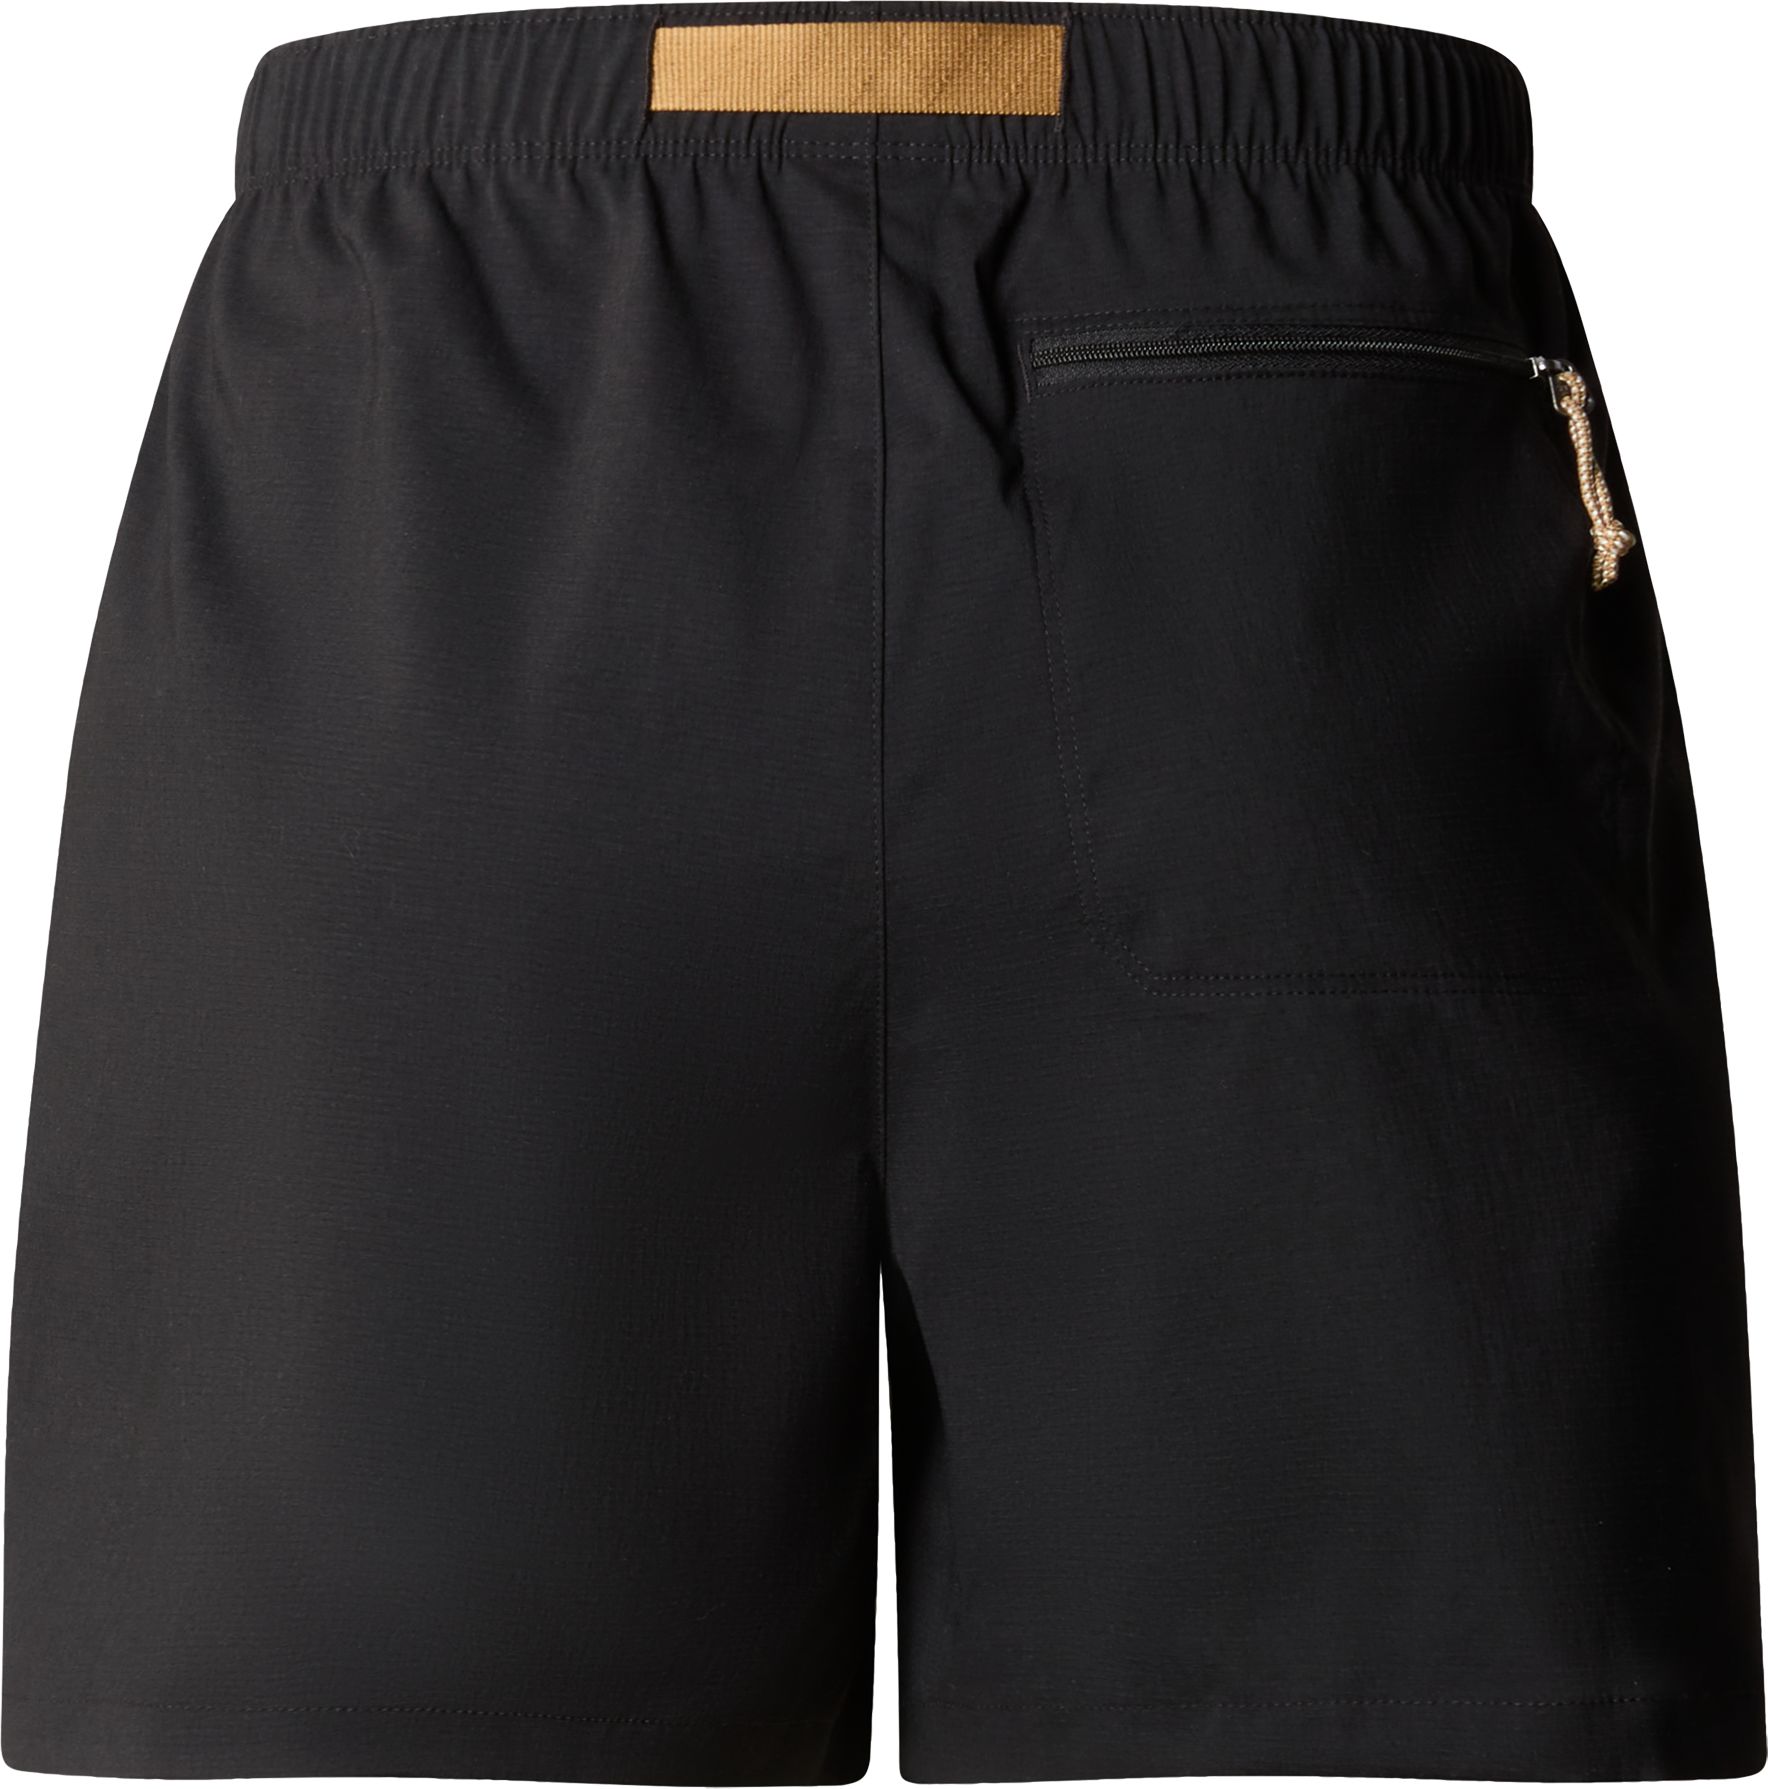 THE NORTH FACE, W CLASS V PATHFINDER BELTED SHORT